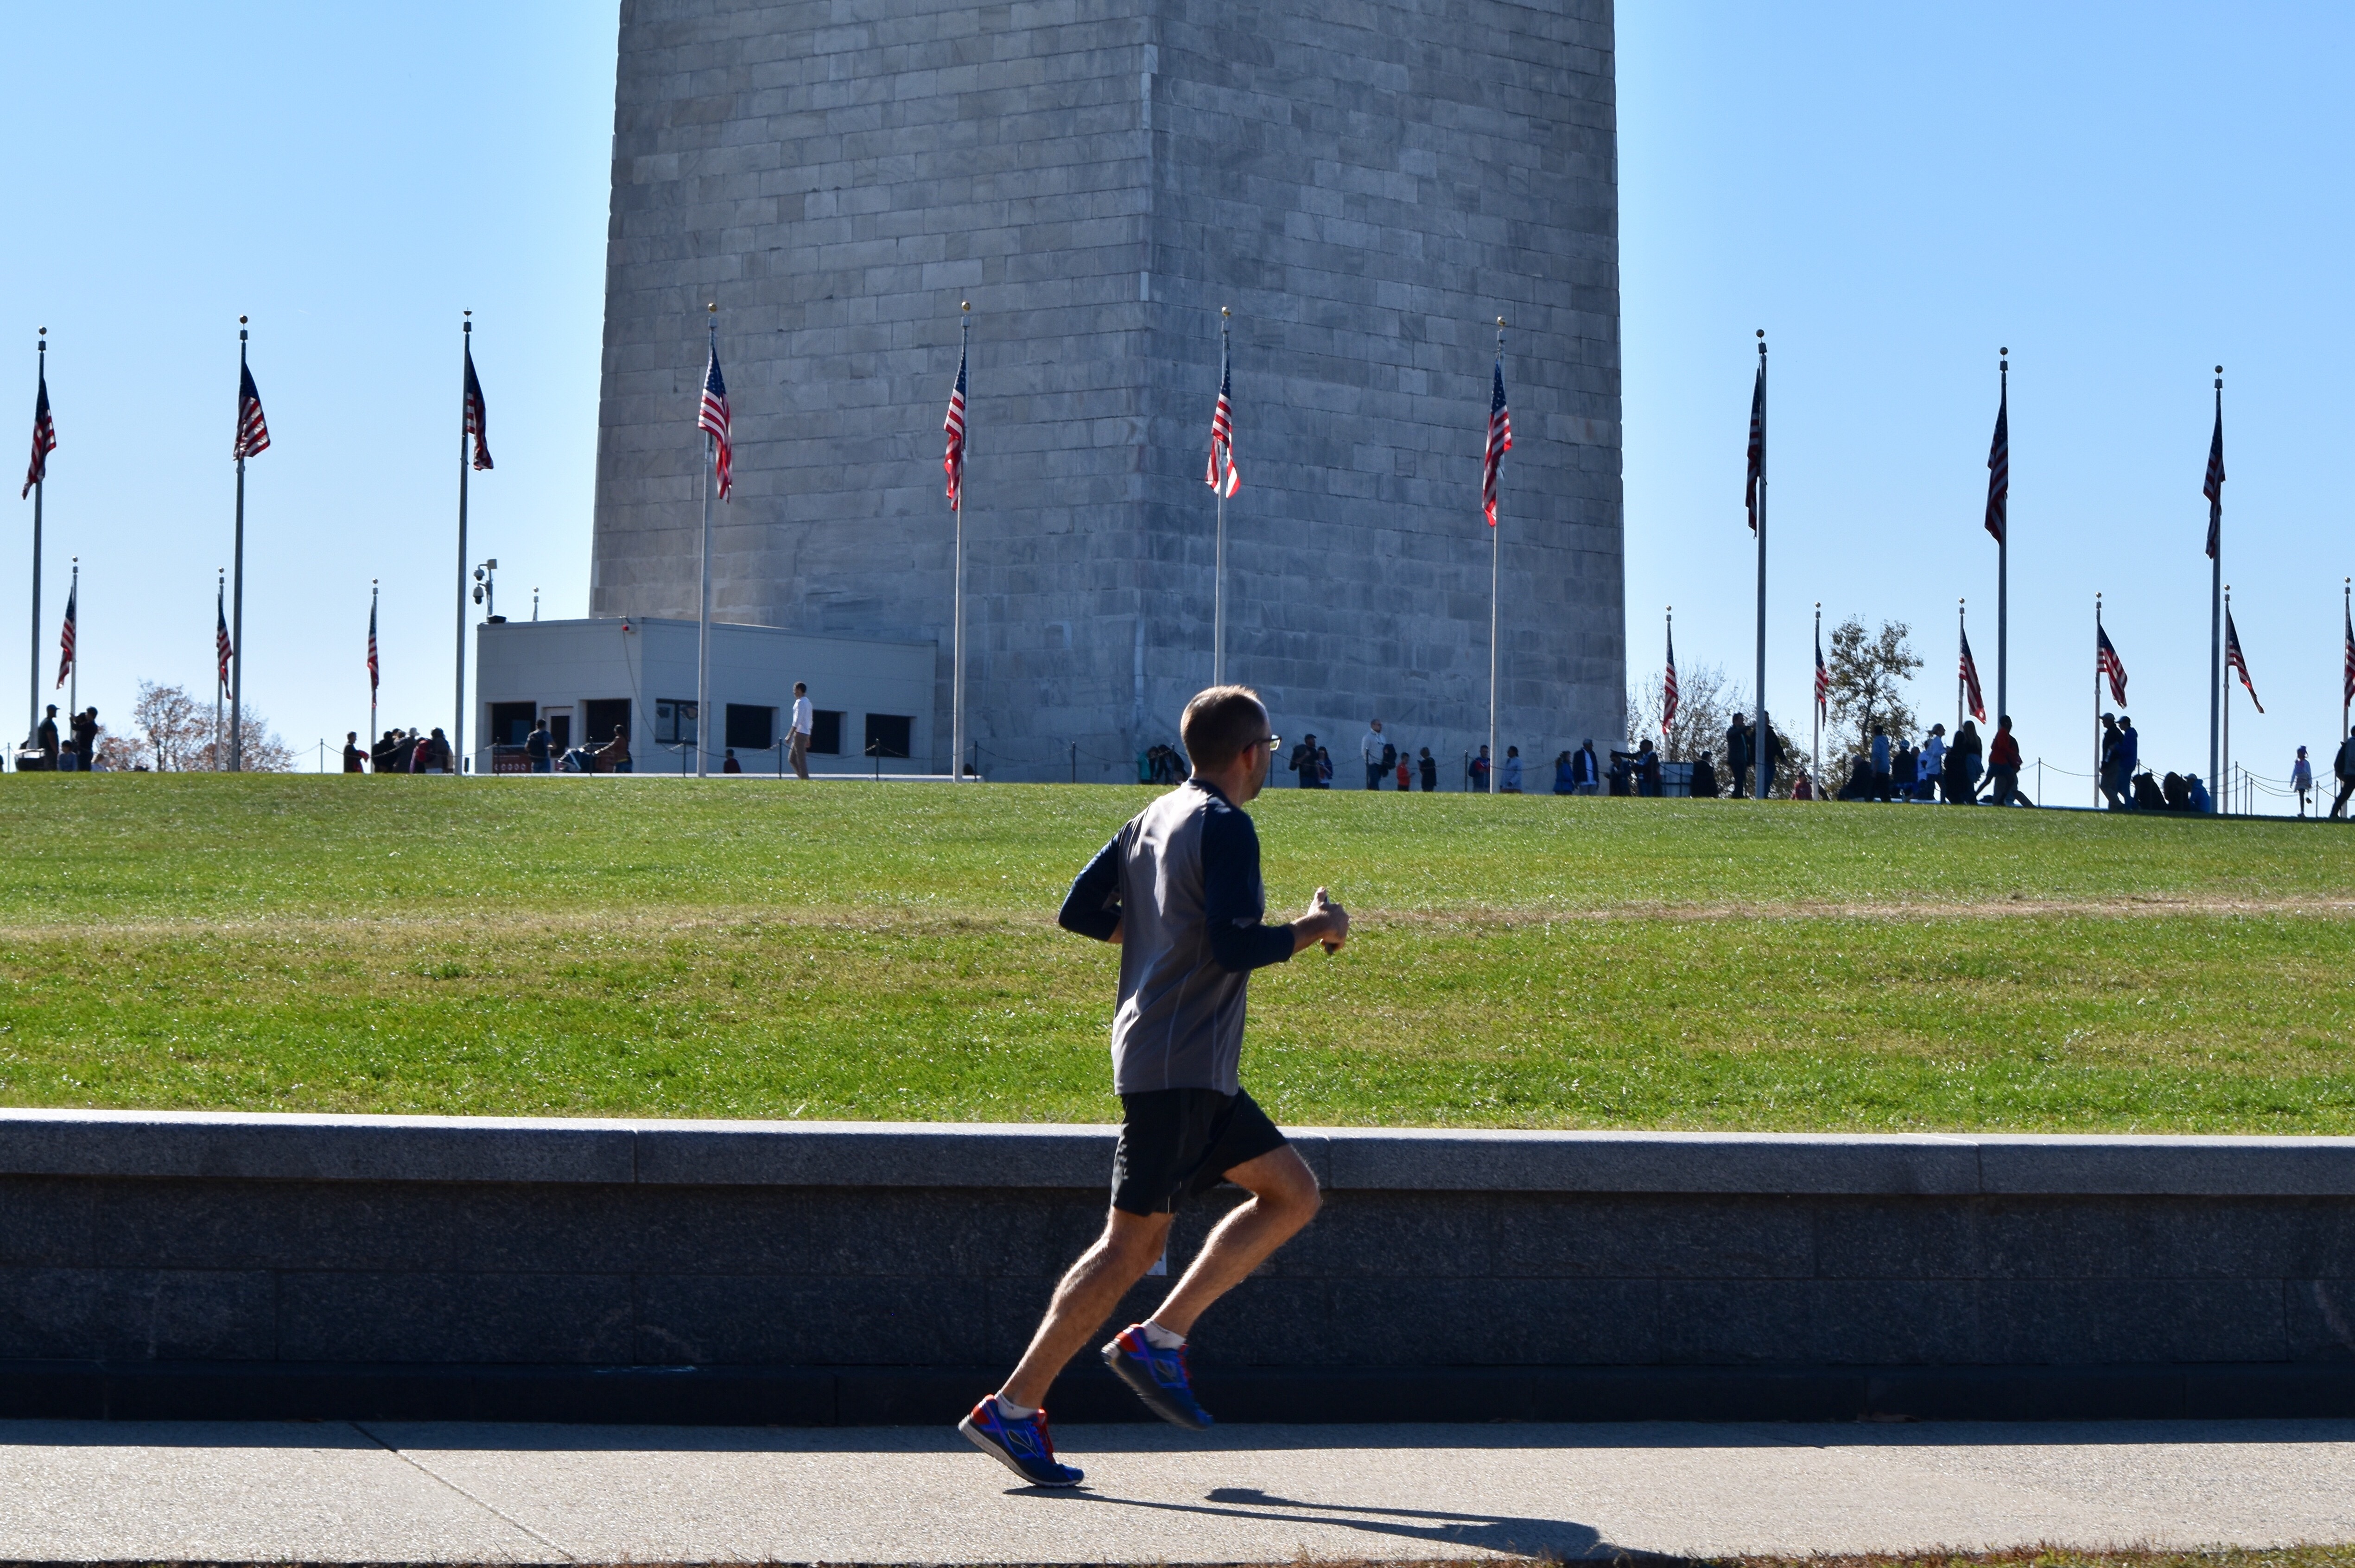 Man running along the path in front of the Washington Monument in Washington, D.C.